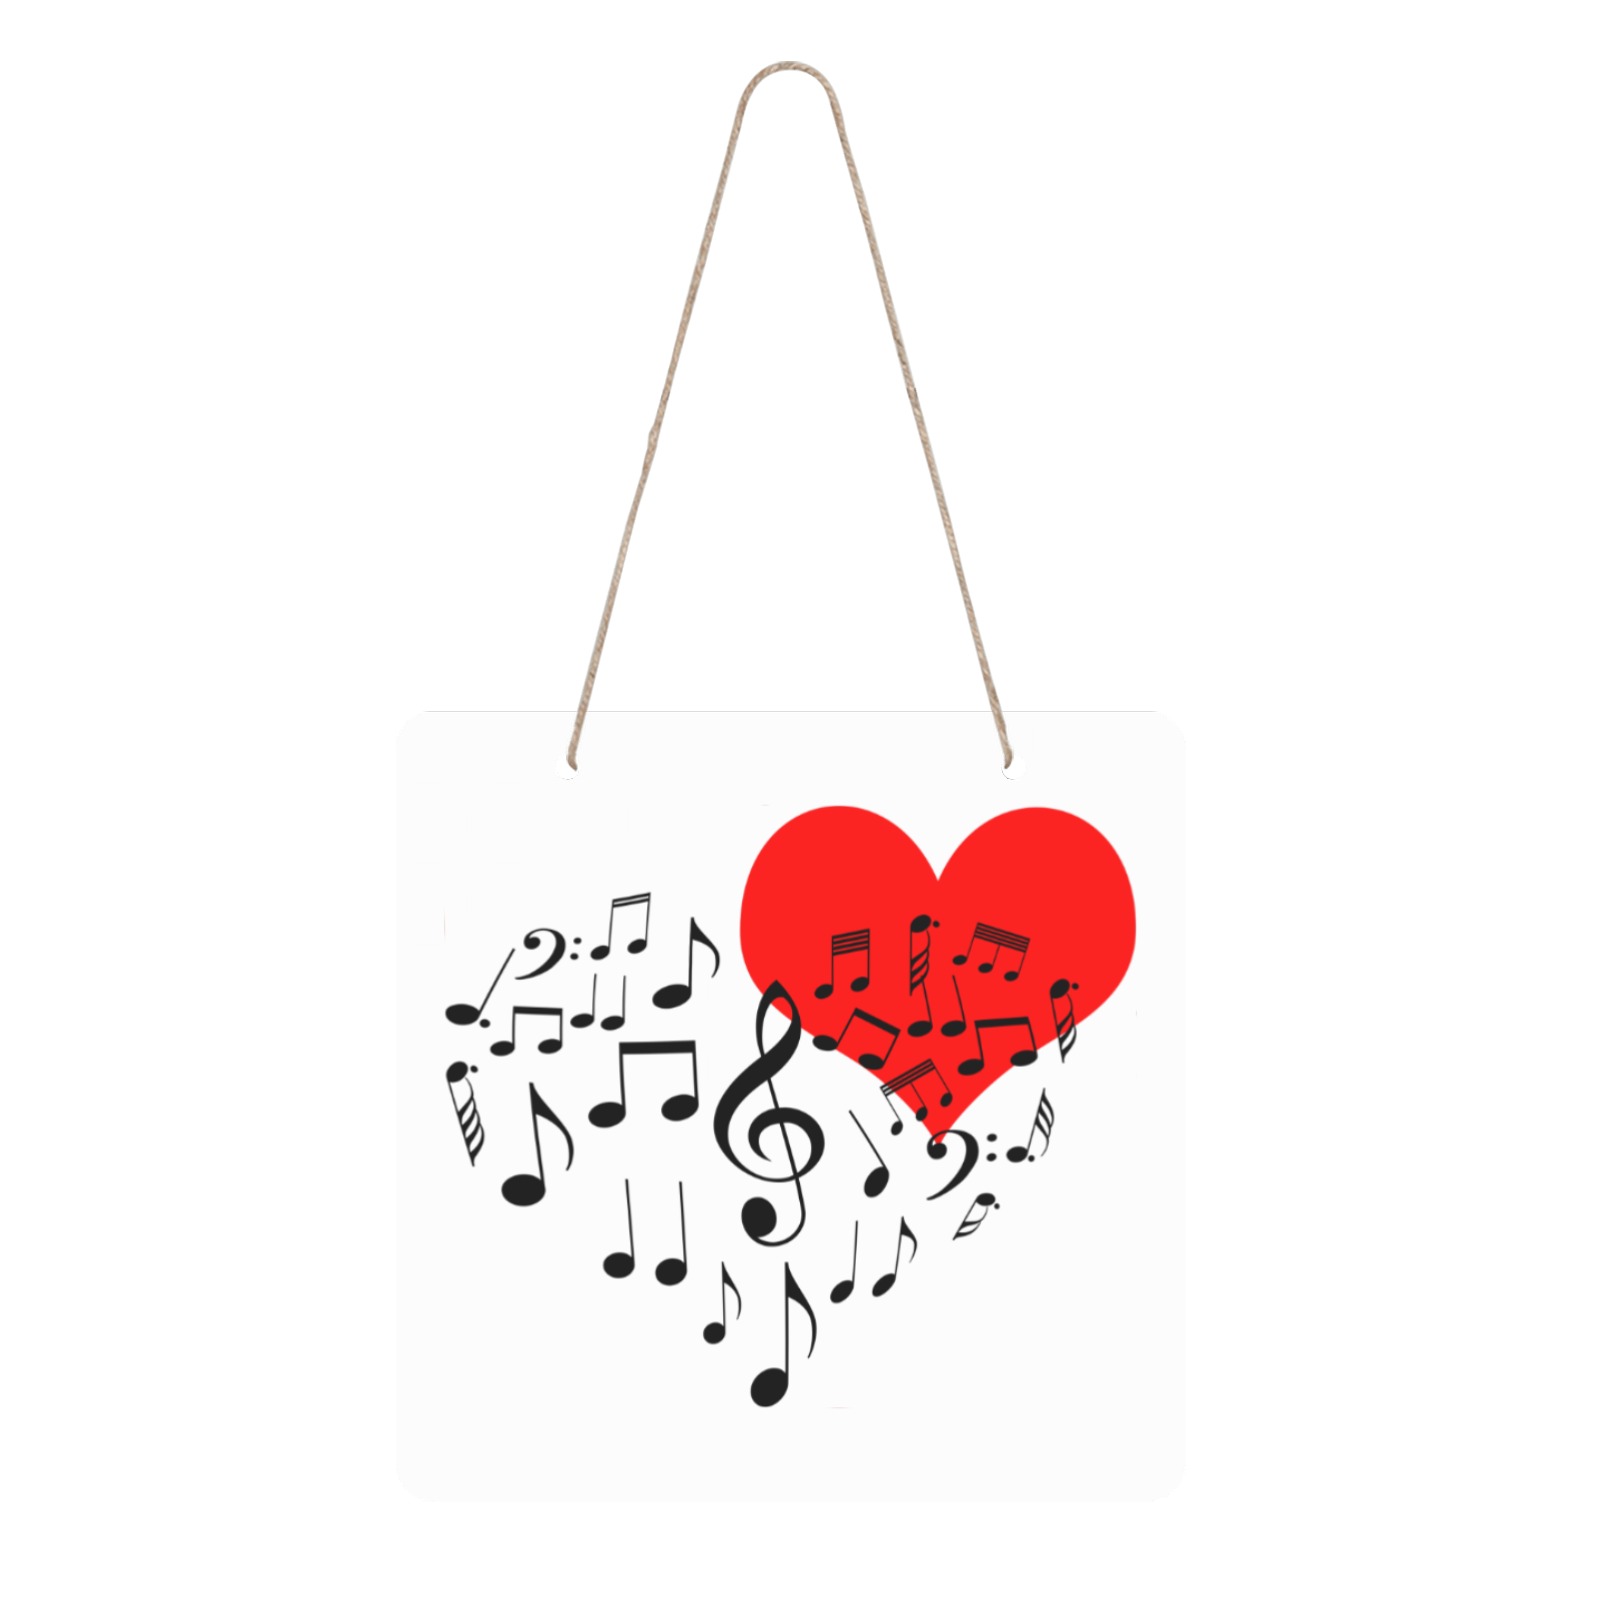 Singing Heart Red Song Black Music Love Romantic Square Wood Door Hanging Sign